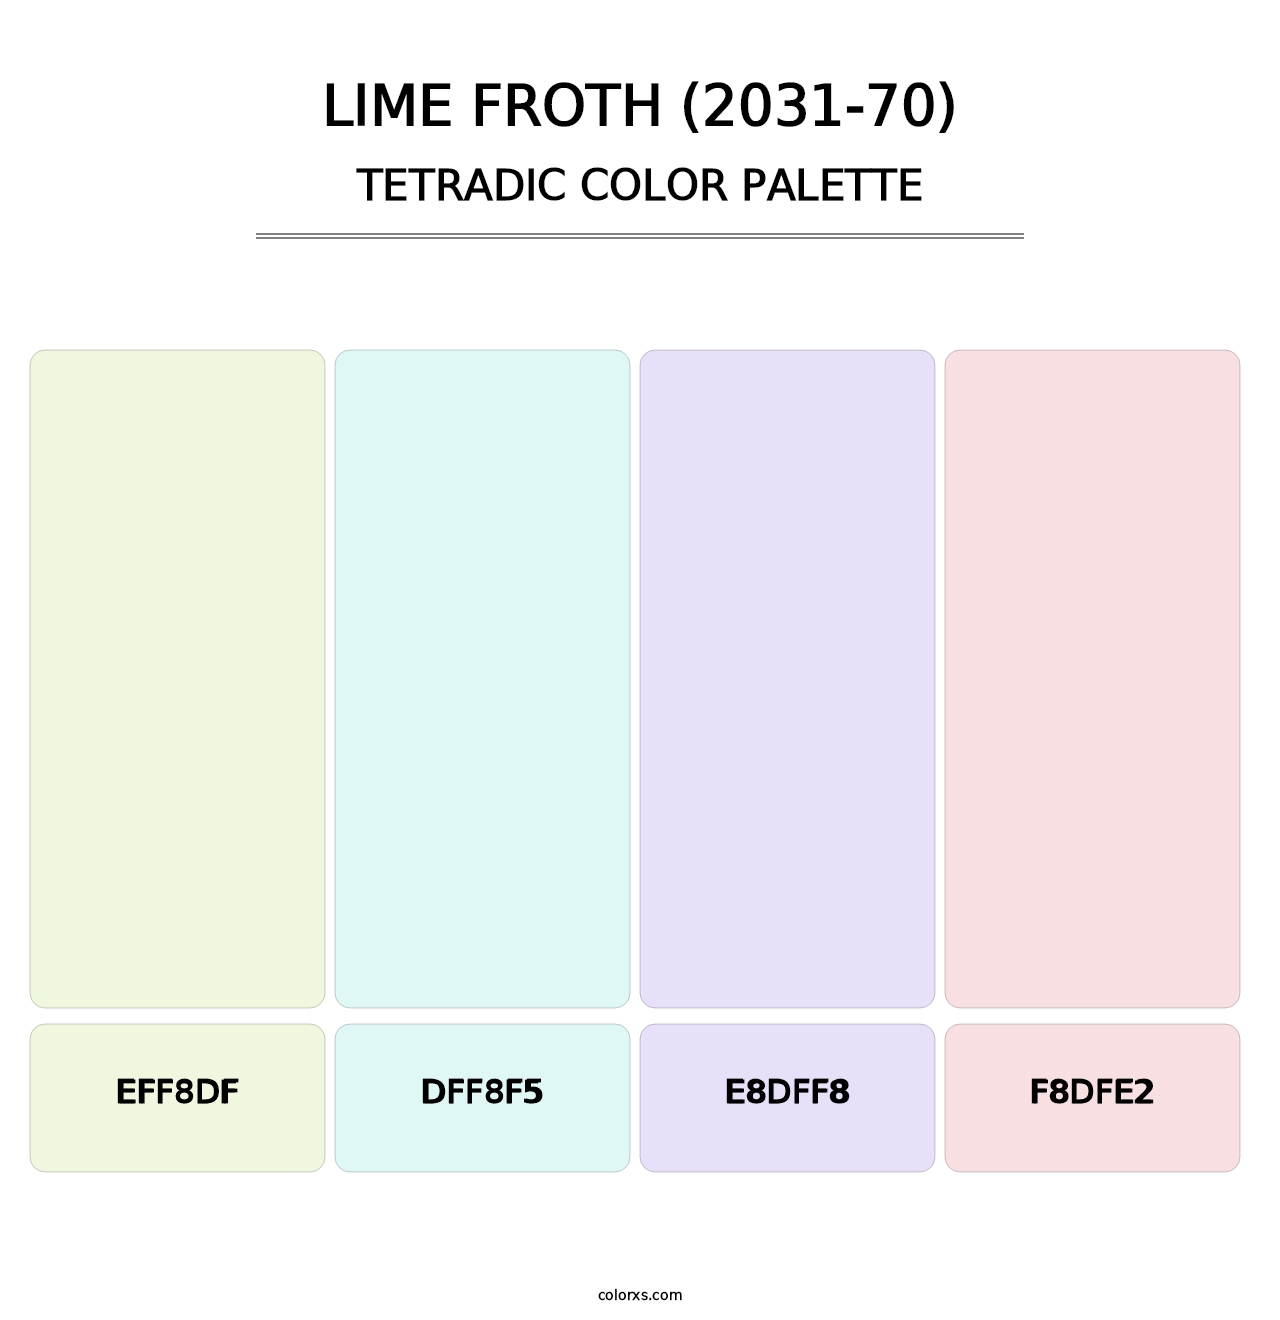 Lime Froth (2031-70) - Tetradic Color Palette